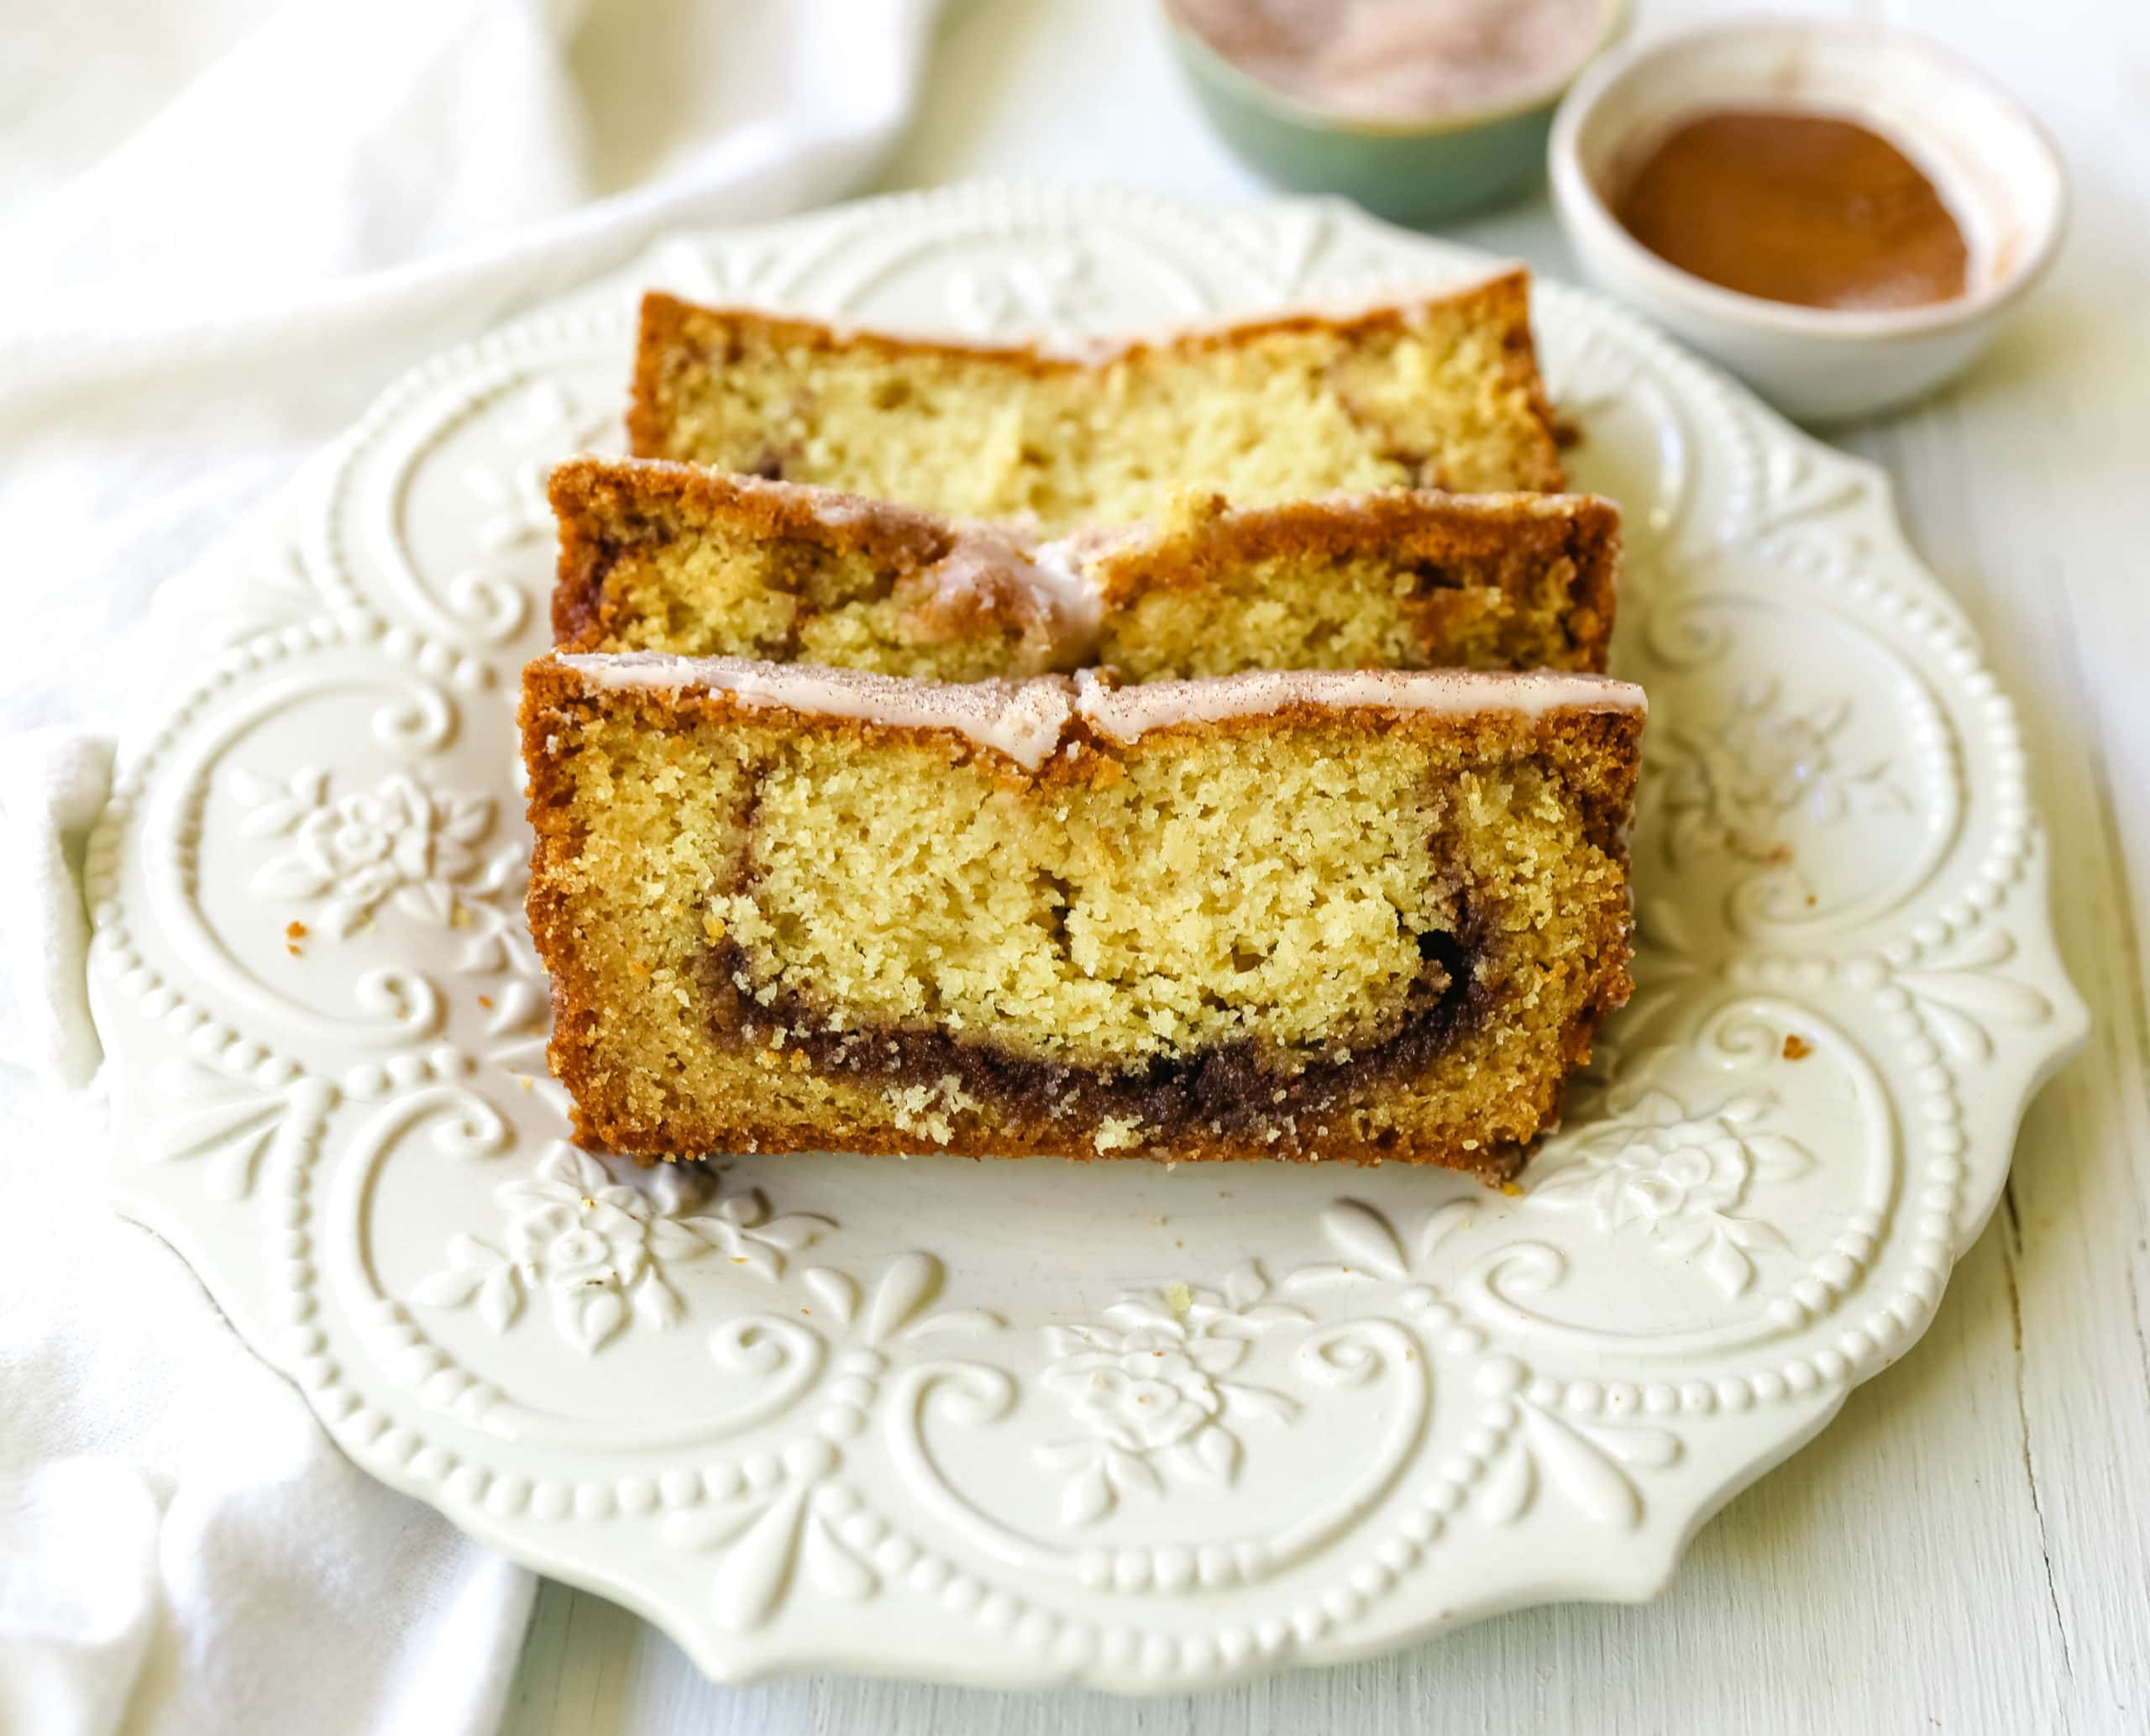 Cinnamon Swirl Quick Bread. Soft and moist cinnamon swirl quick bread with cinnamon sugar streusel is perfect to share with neighbors and friends! www.modernhoney.com #quickbread #cinnamonswirlbread #cinnamonbread